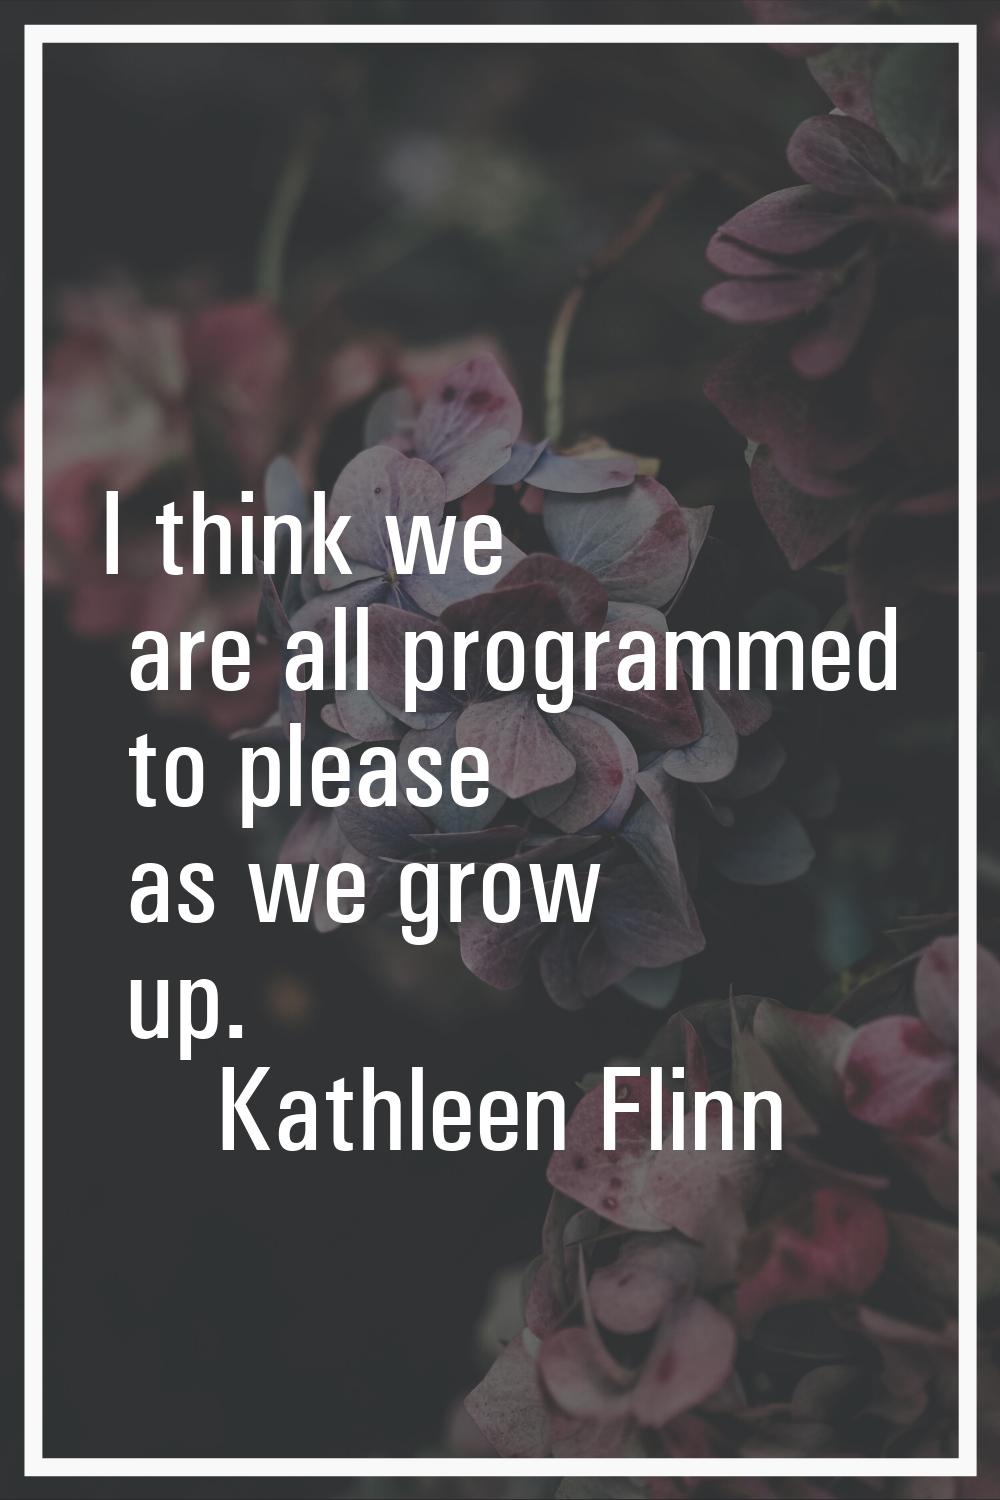 I think we are all programmed to please as we grow up.